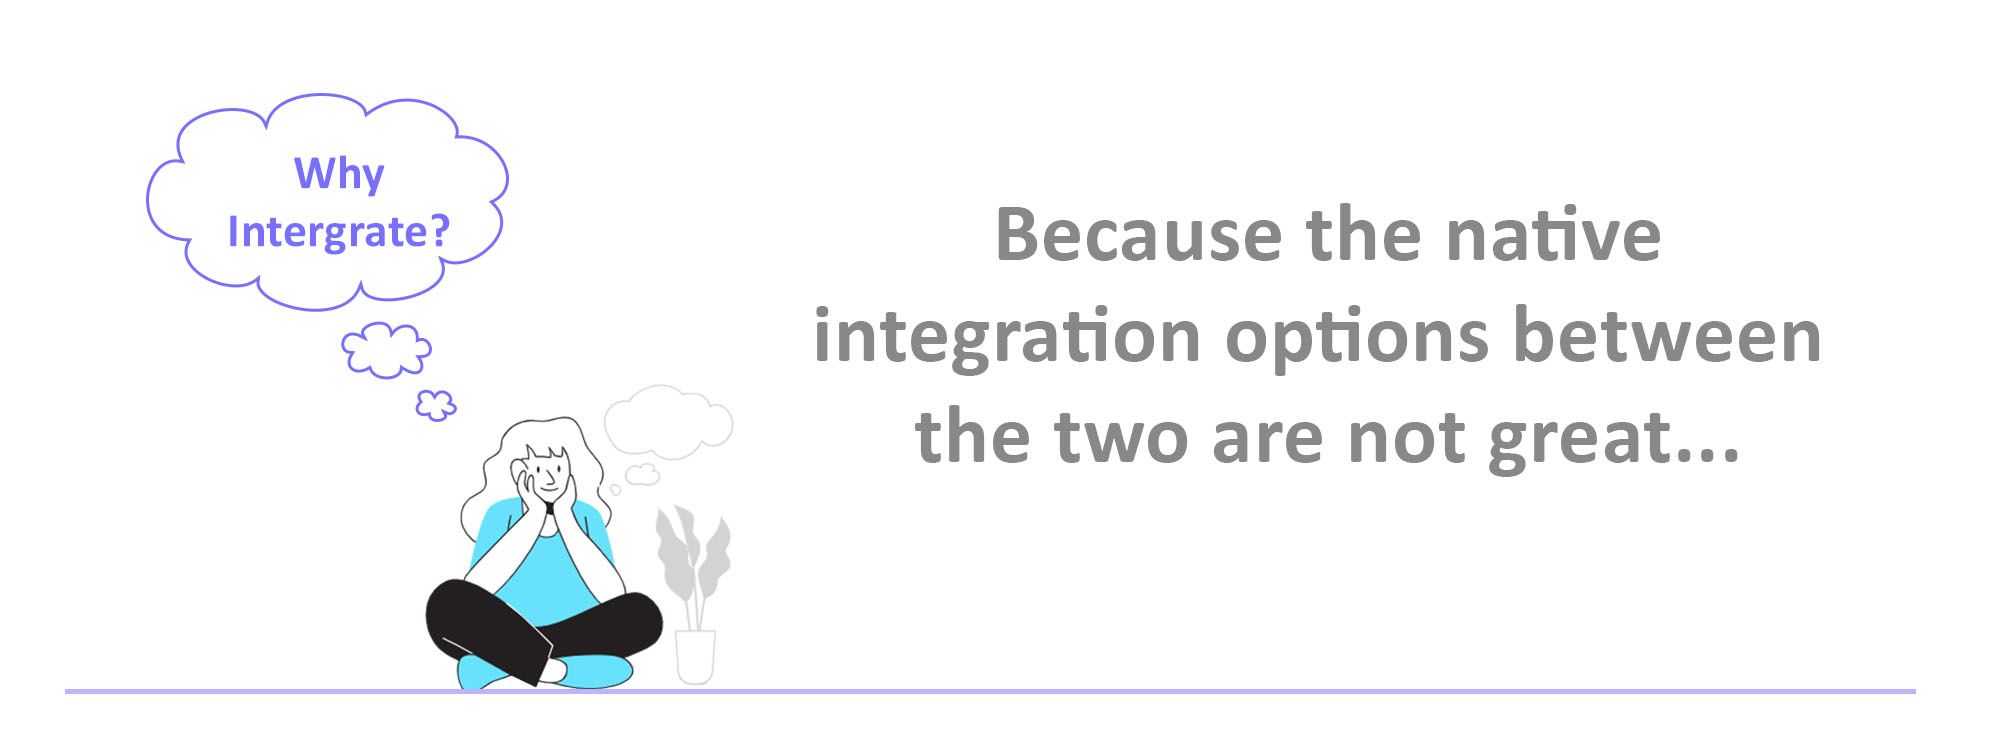 Native integration options for connecting HubSpot & SharePoint are not great